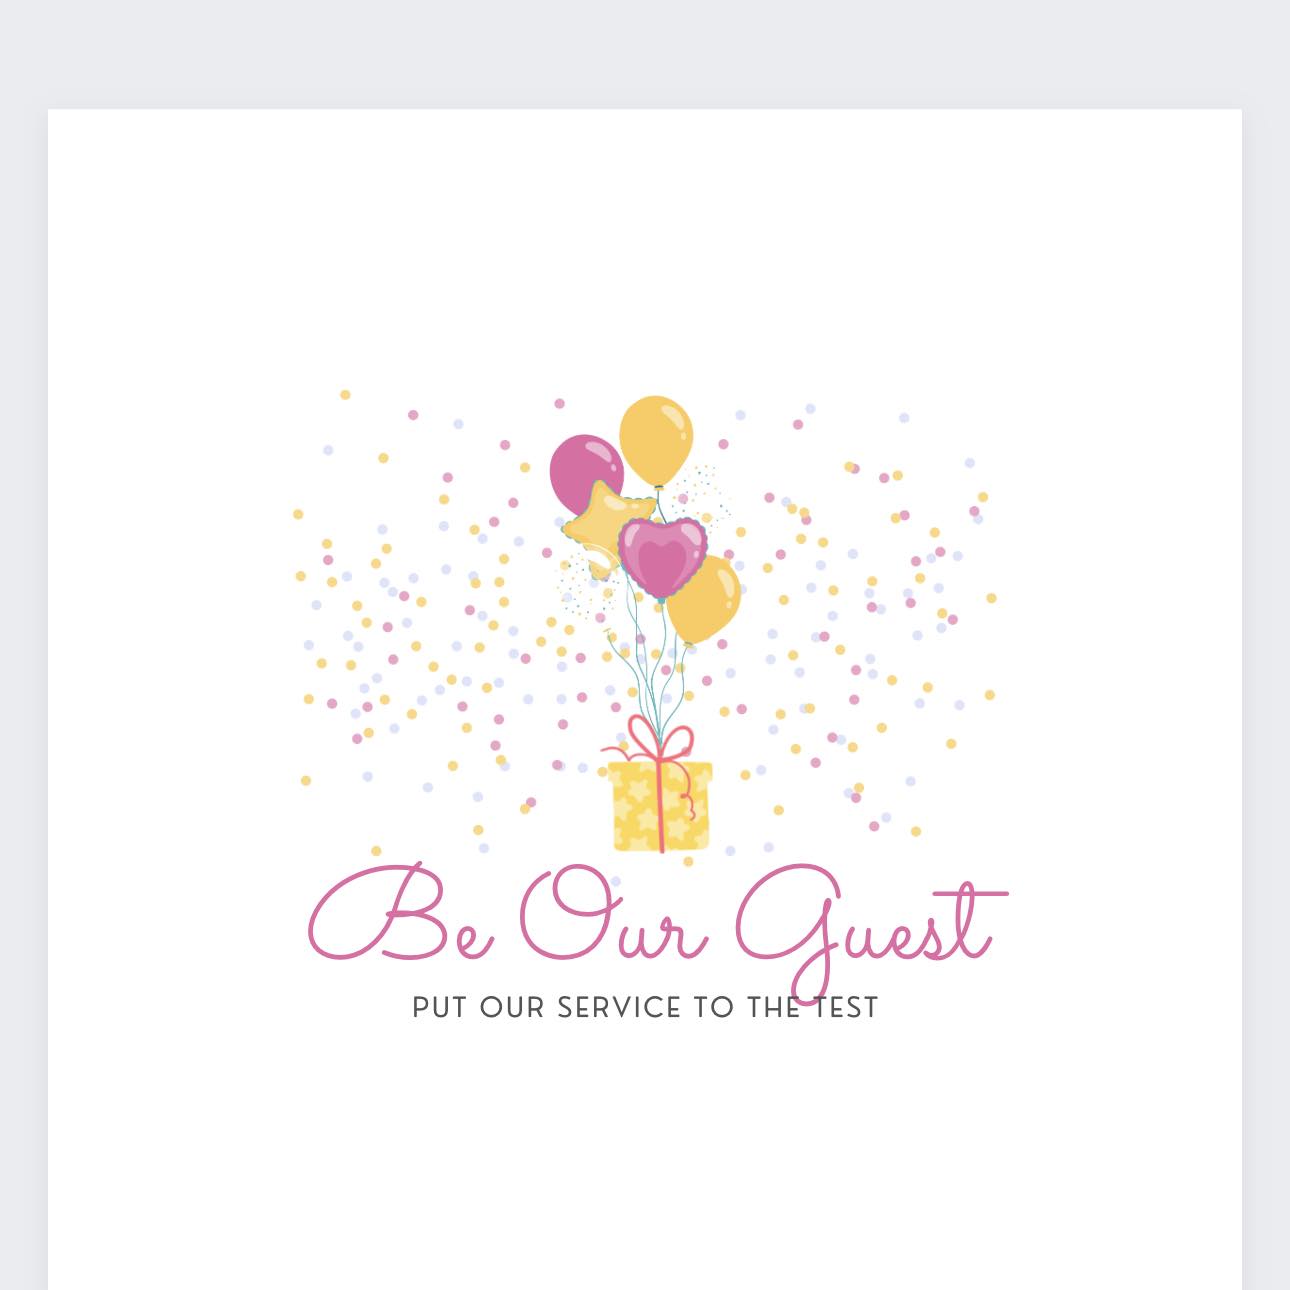 Be our Guest Event Planning - Put Our Service to the Test